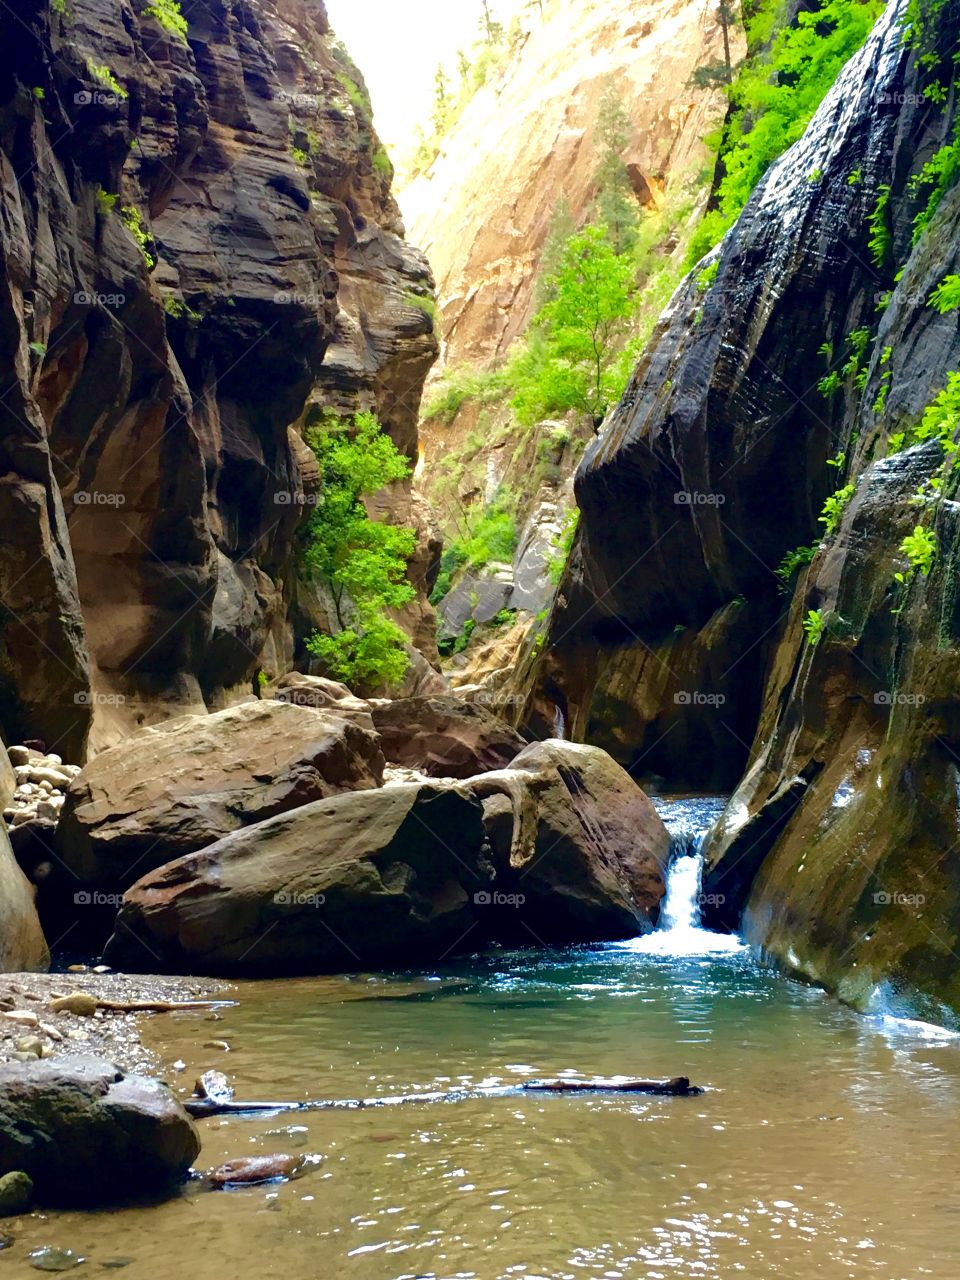 Early morning hike in the Narrows at Zion’s National Park, Utah